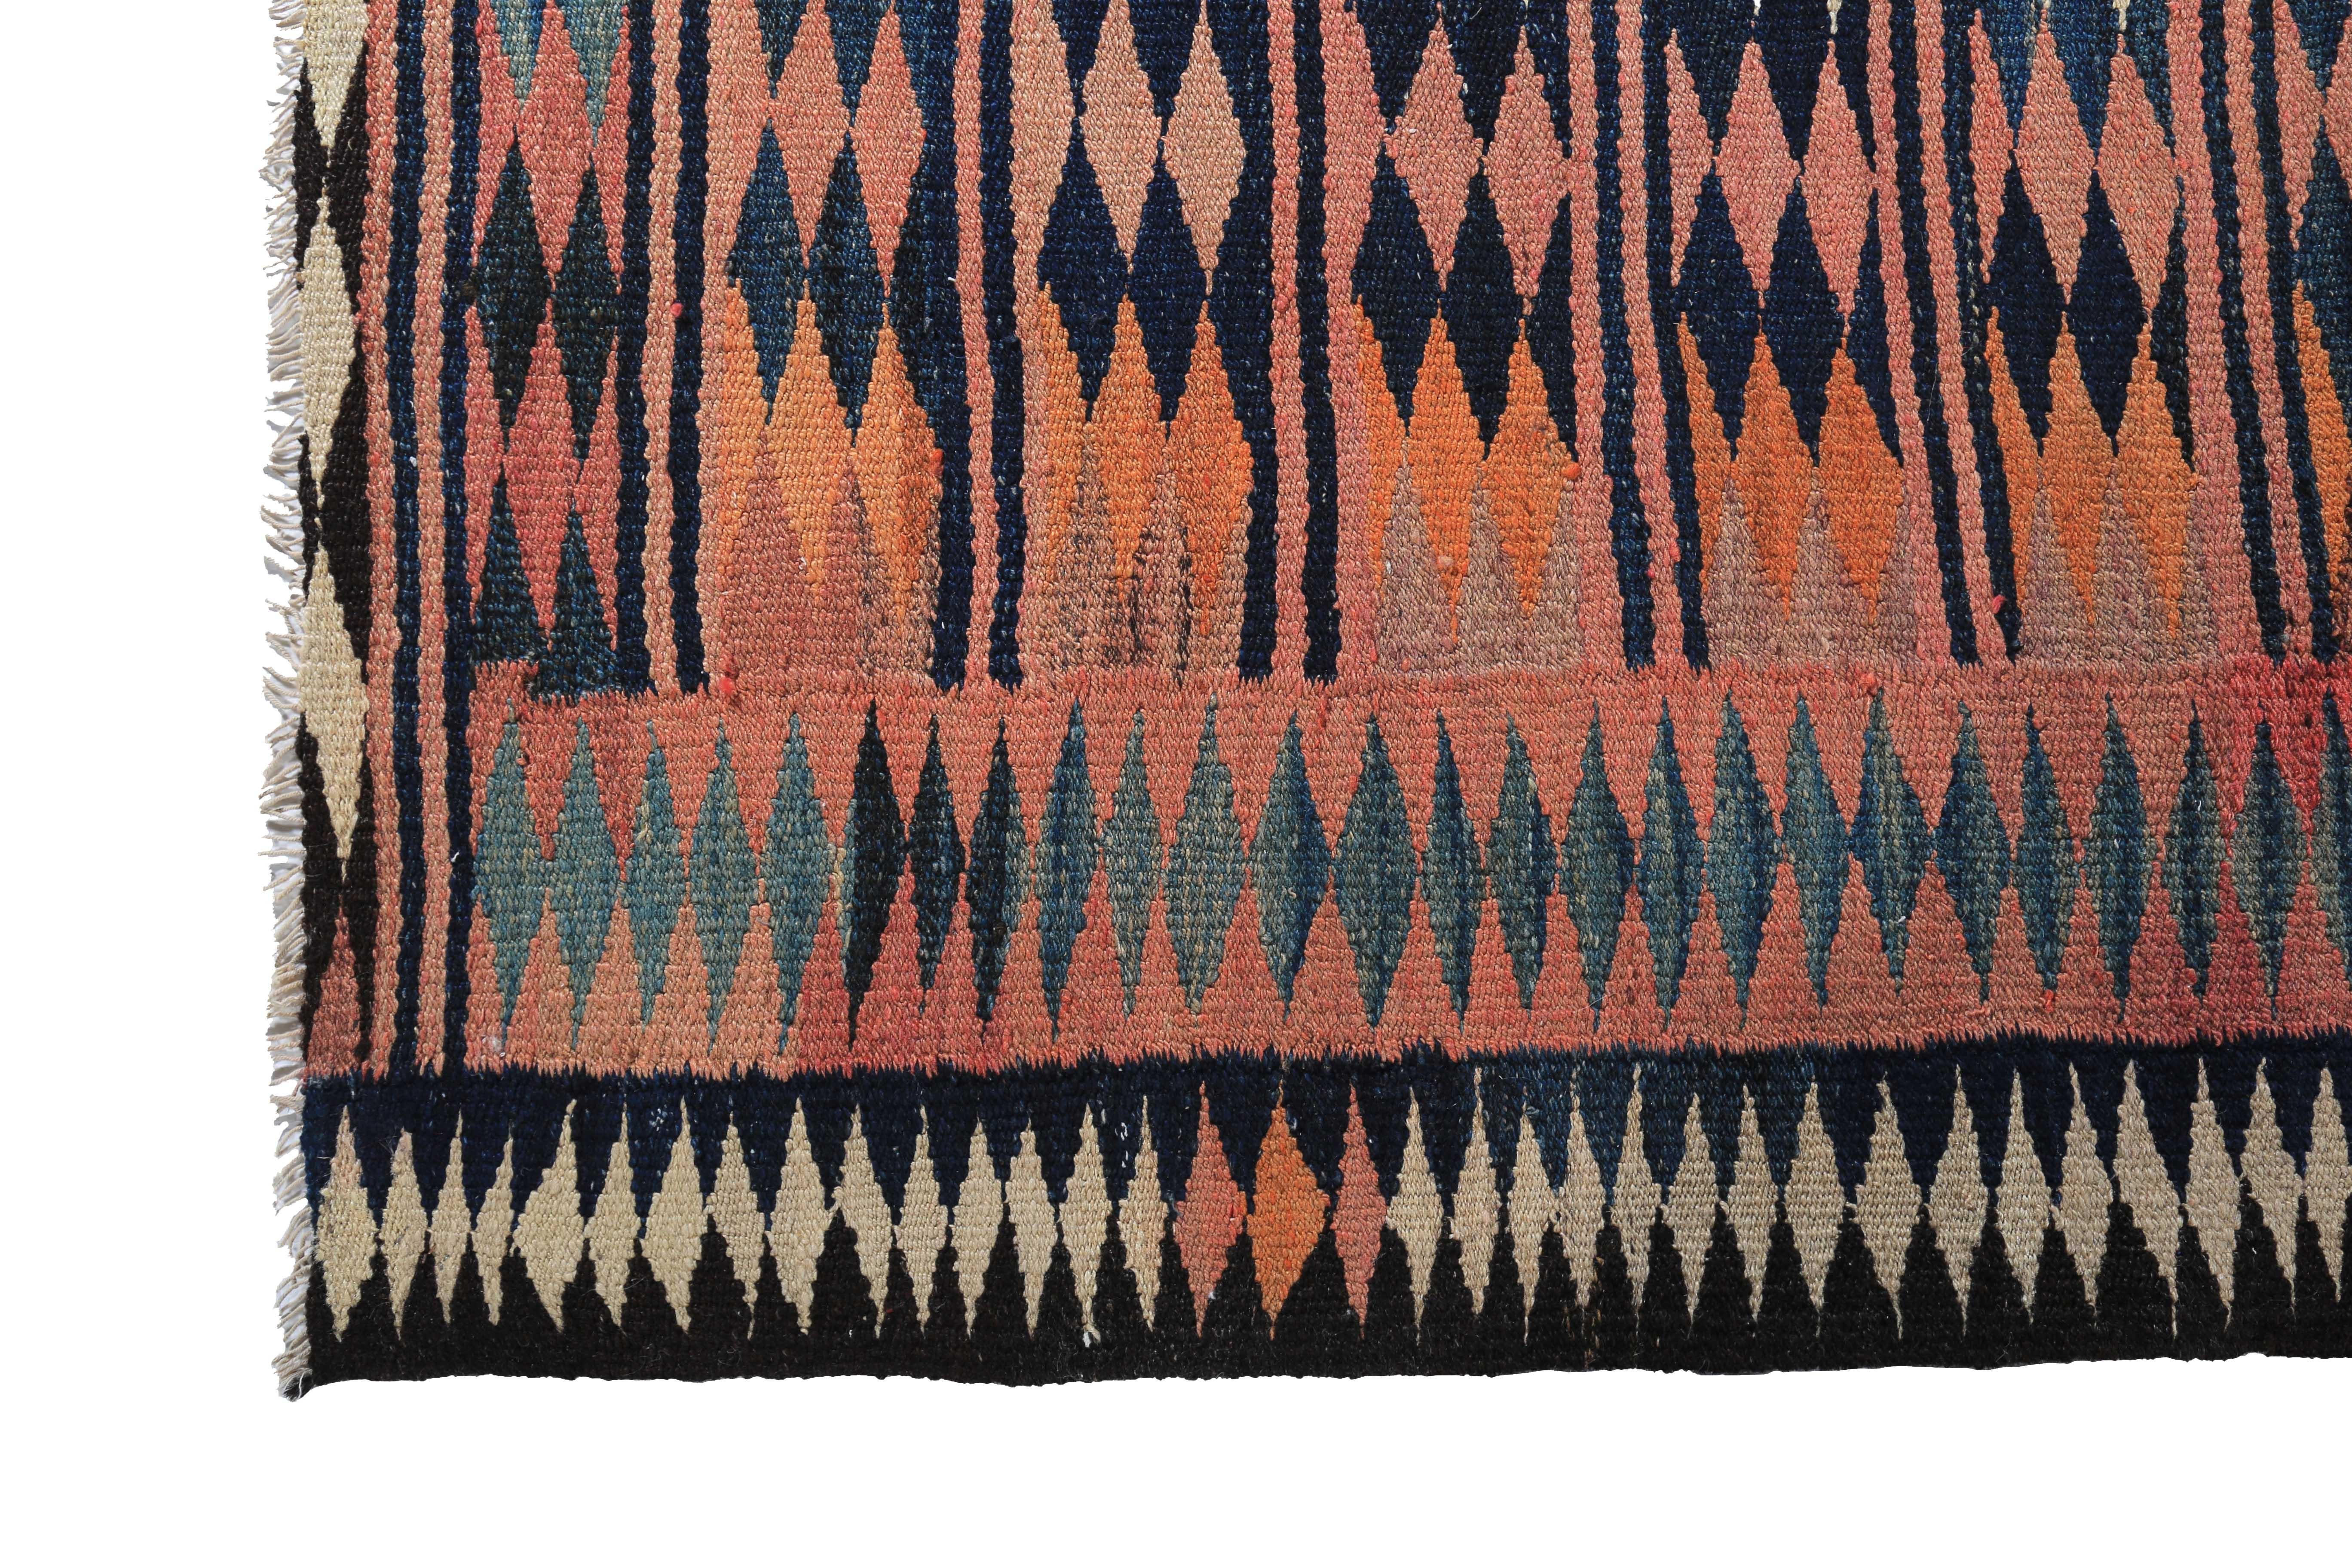 Hand-Woven New Turkish Kilim Rug with Colorful Geometric Patterns on Black Field For Sale